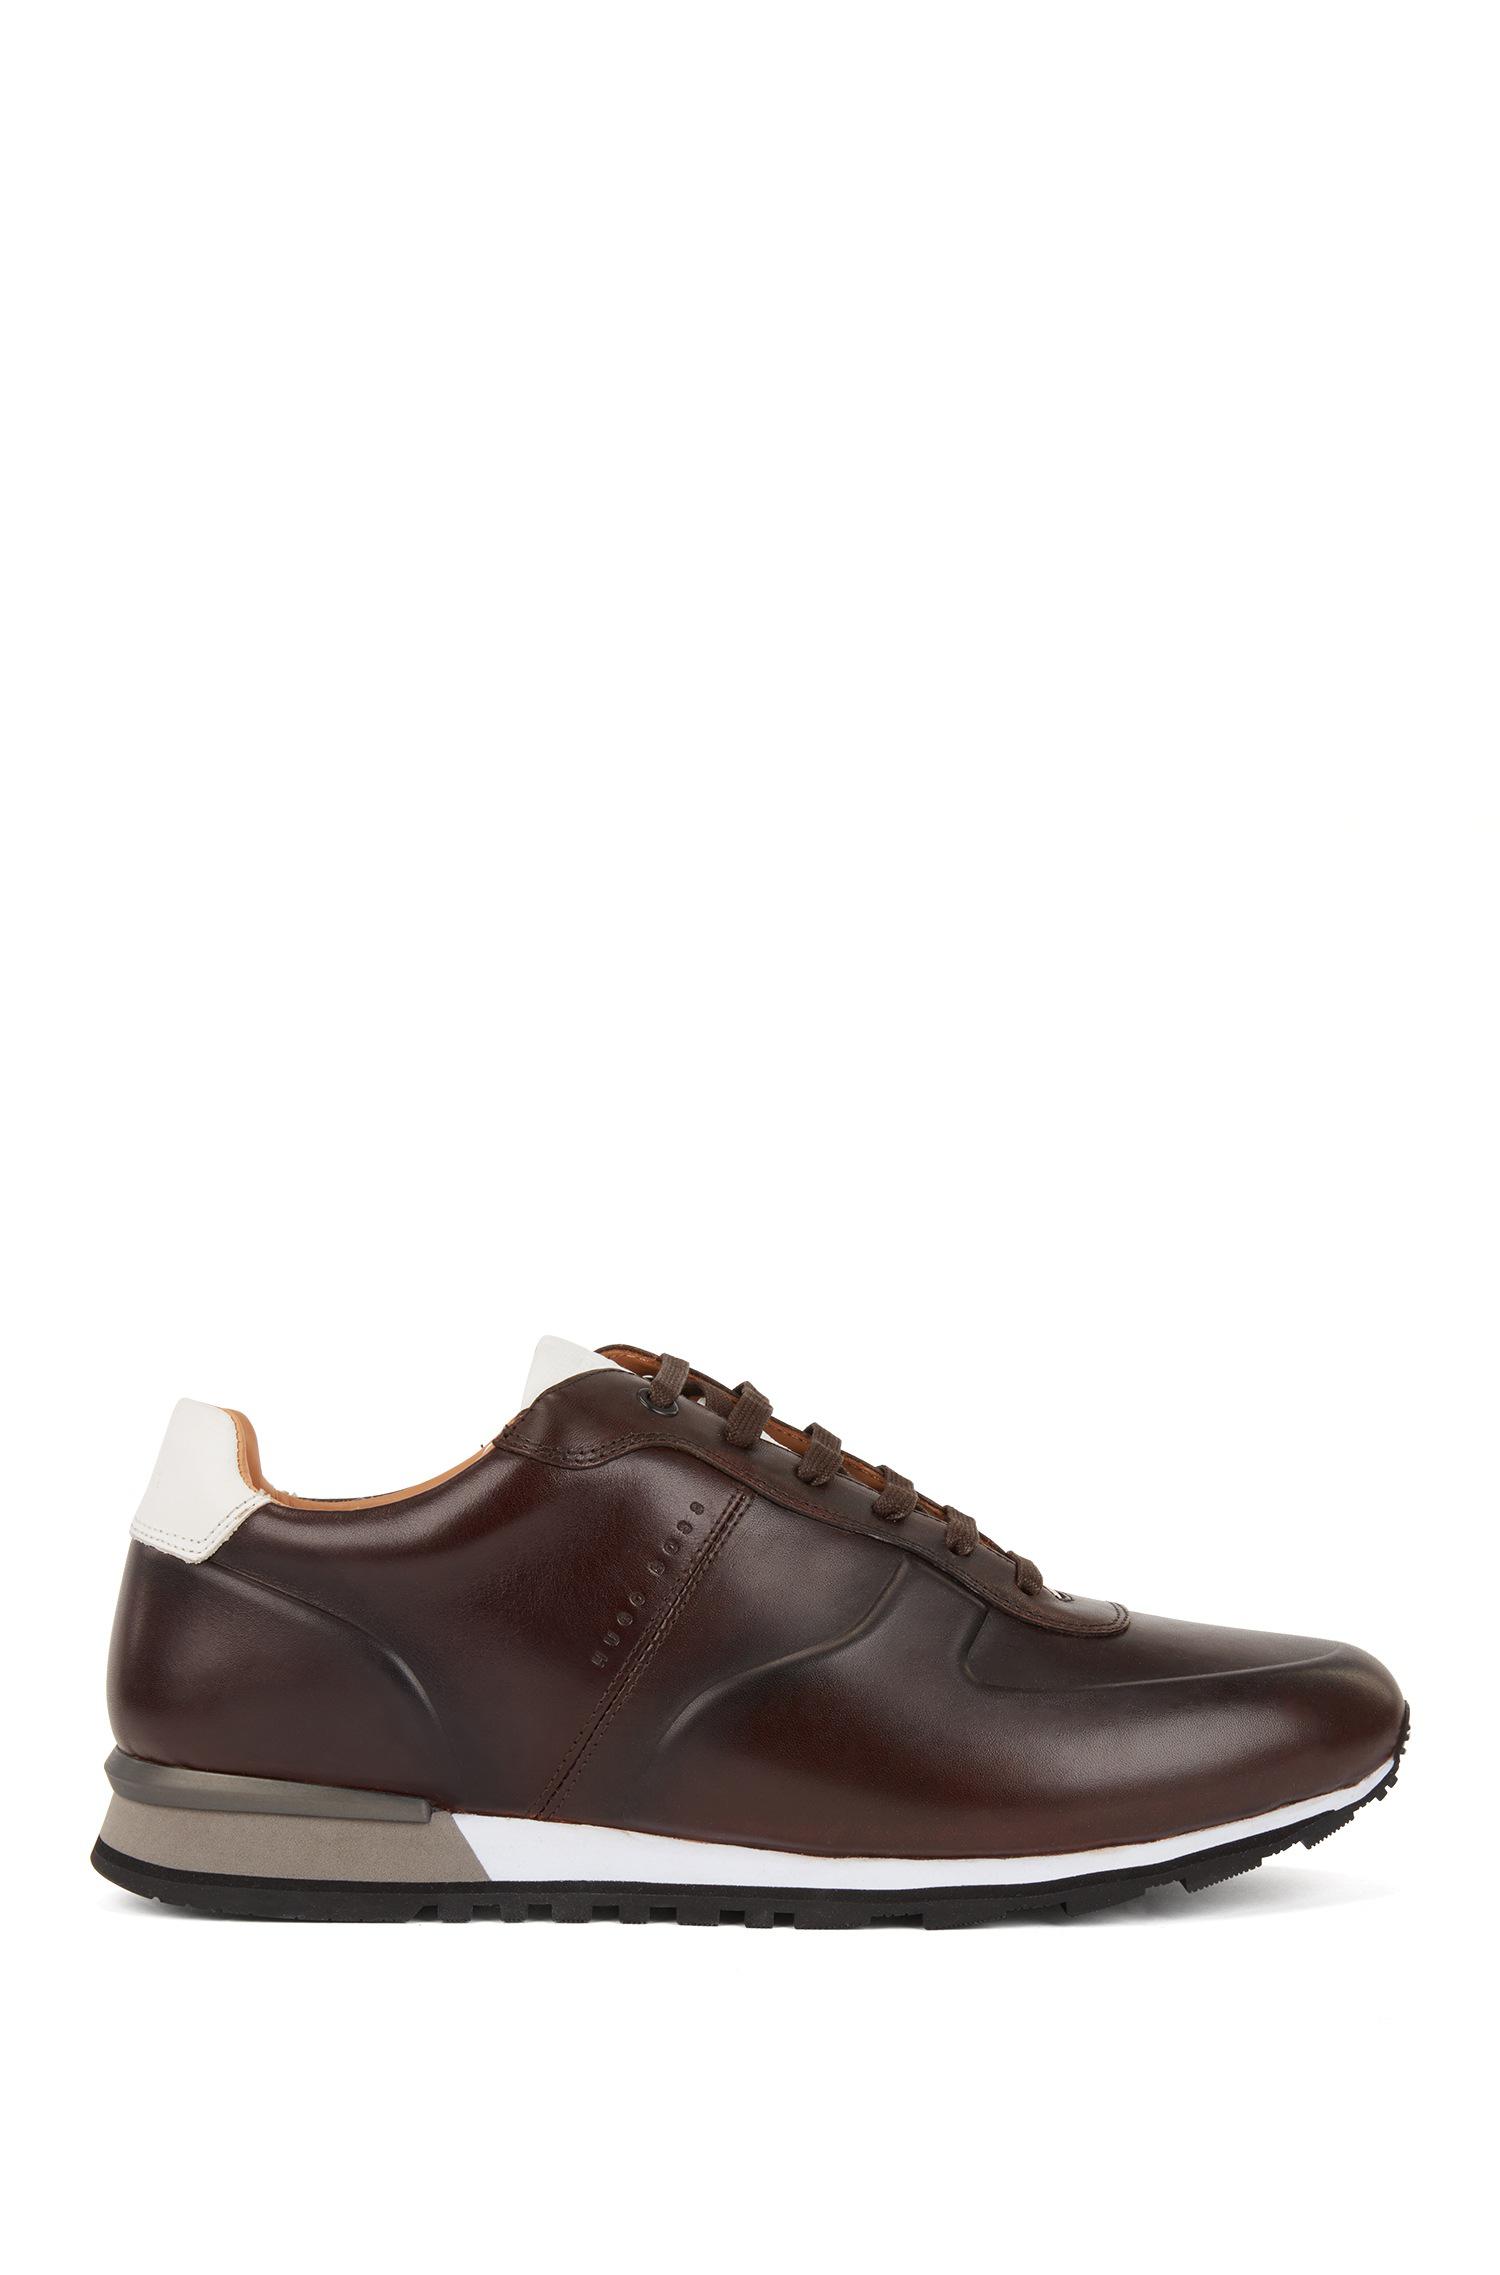 BOSS Running-inspired Sneakers In Burnished Calf Leather in Dark Brown ...